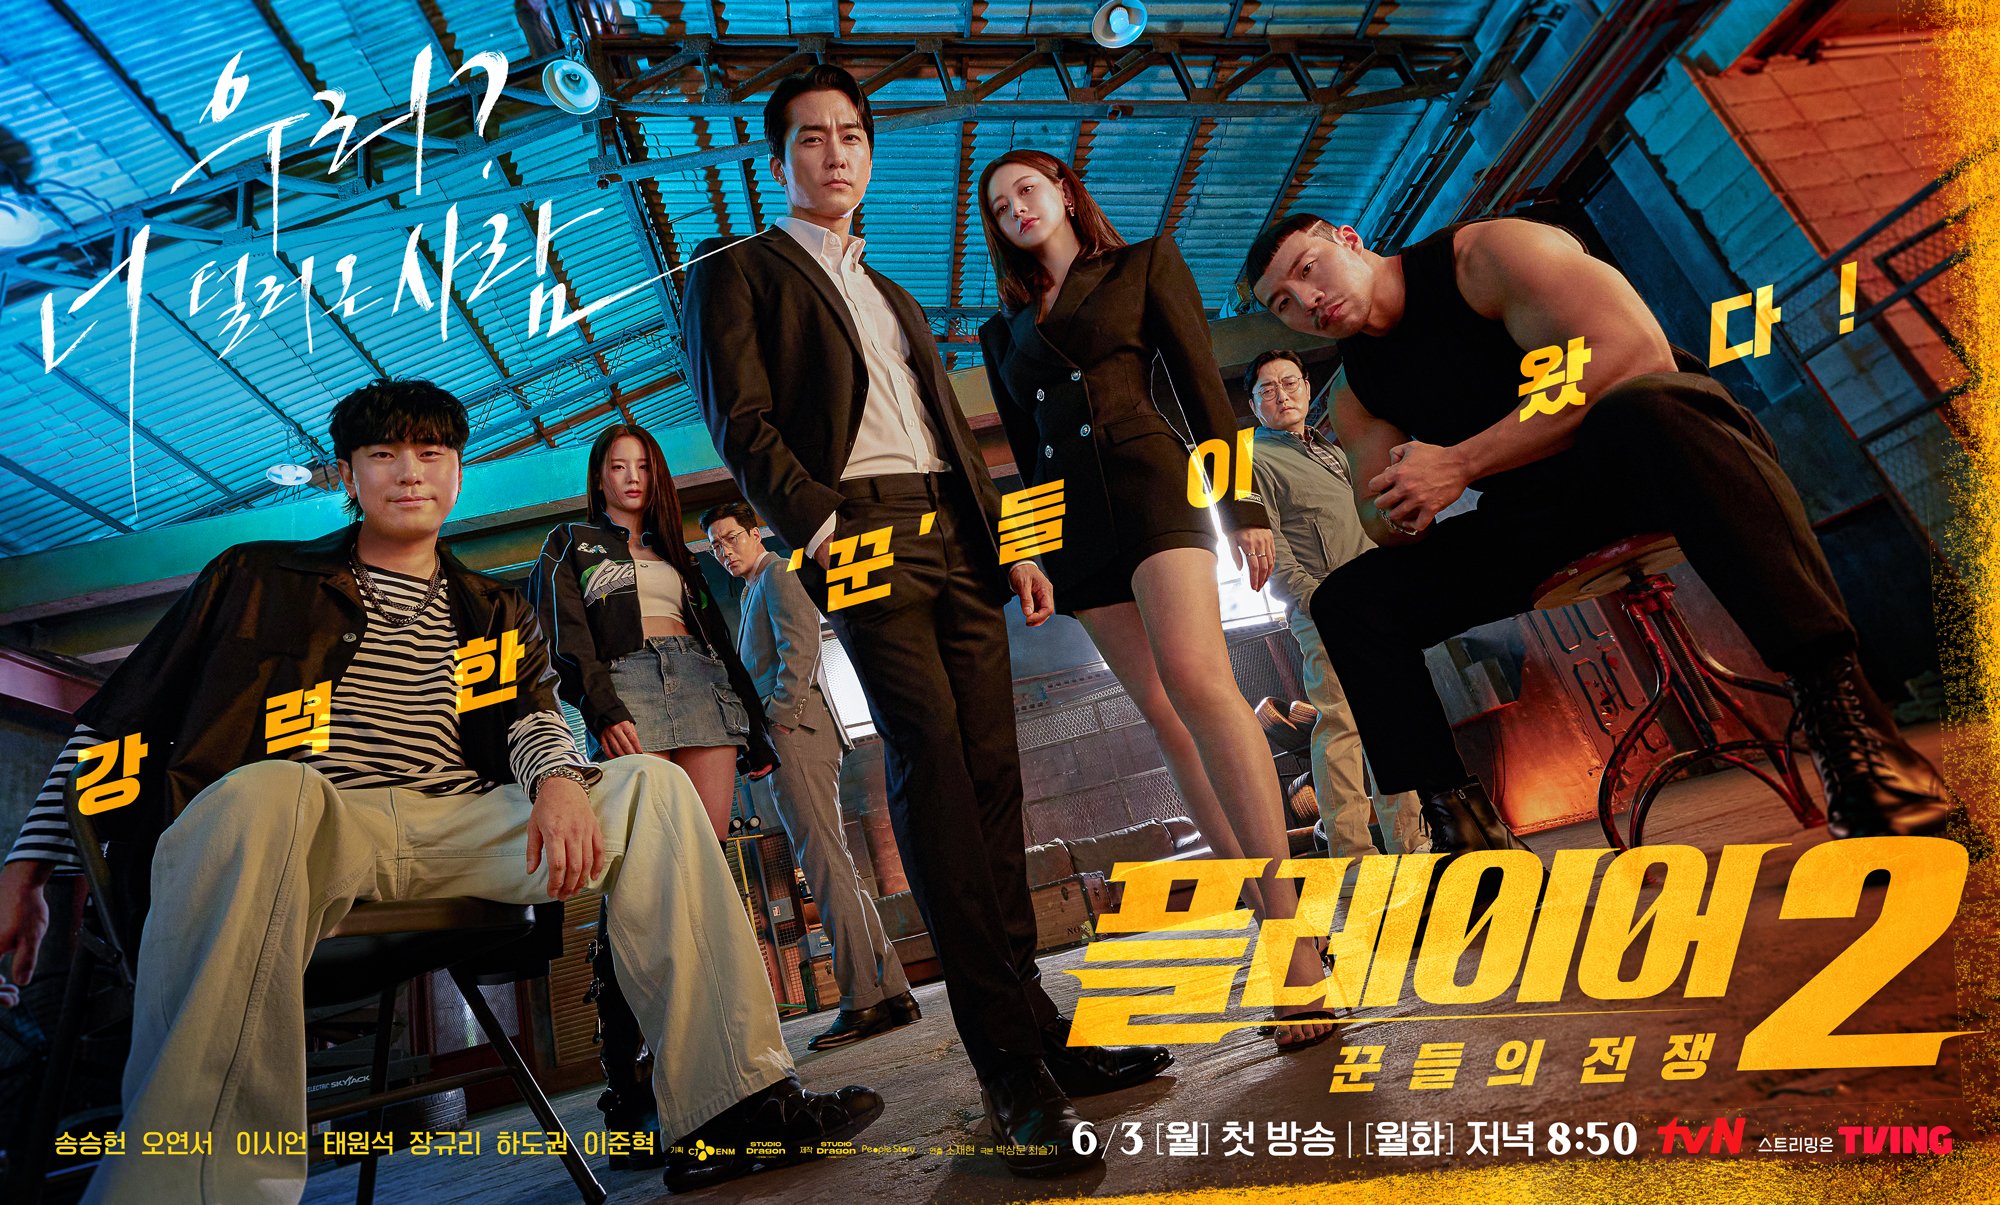 Song Seung Heon, Oh Yeon Seo, And More Show Off Their Teamwork In New 